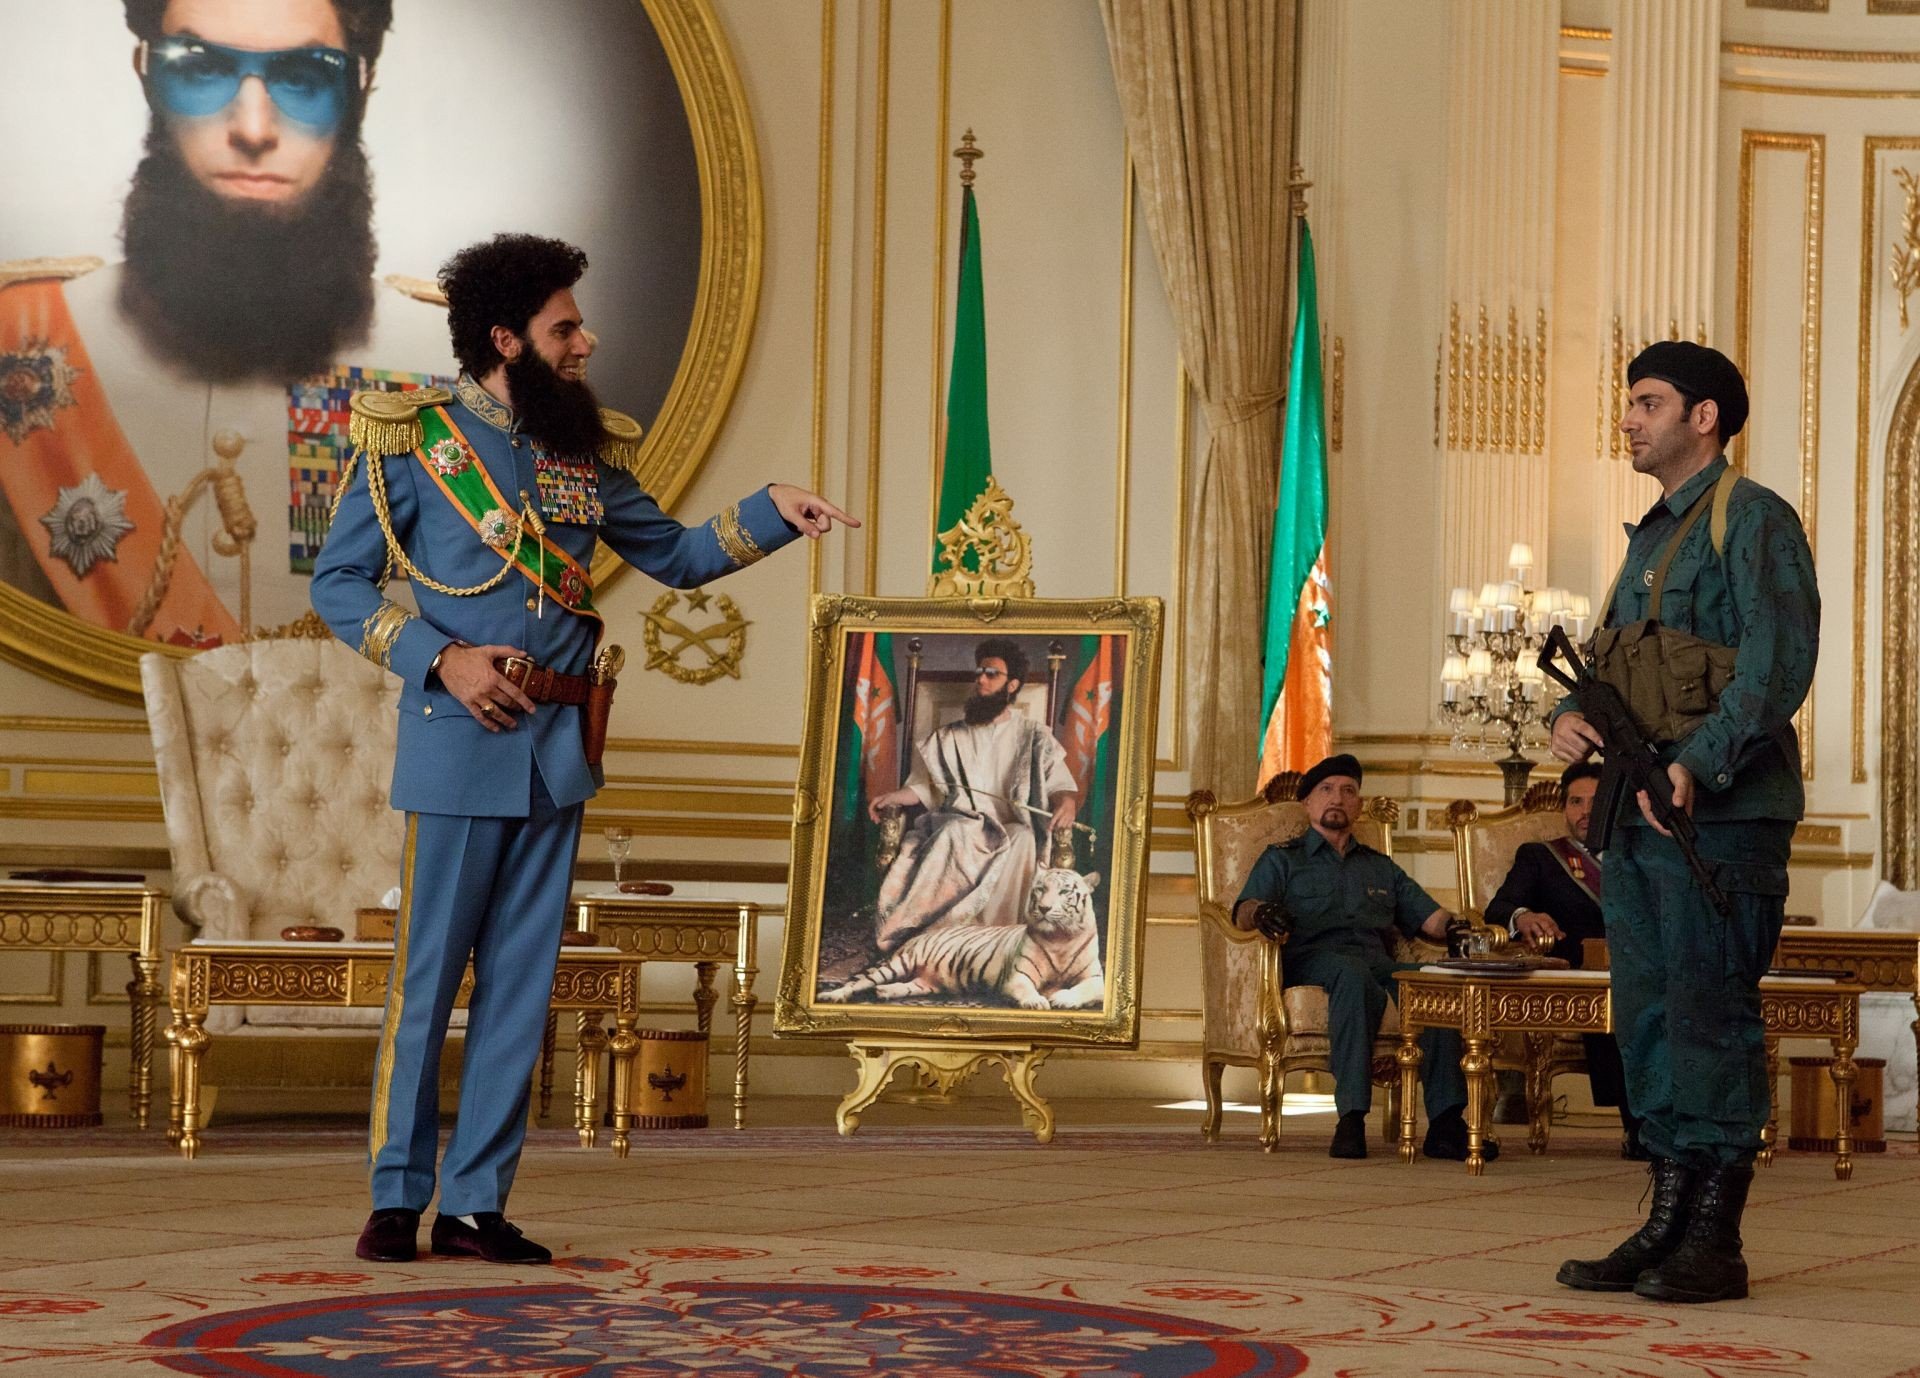 Sacha Baron Cohen stars as General Aladeen and Ben Kingsley stars as Tamir in Paramount Pictures' The Dictator (2012). Photo credit by Melinda Sue Gordon.